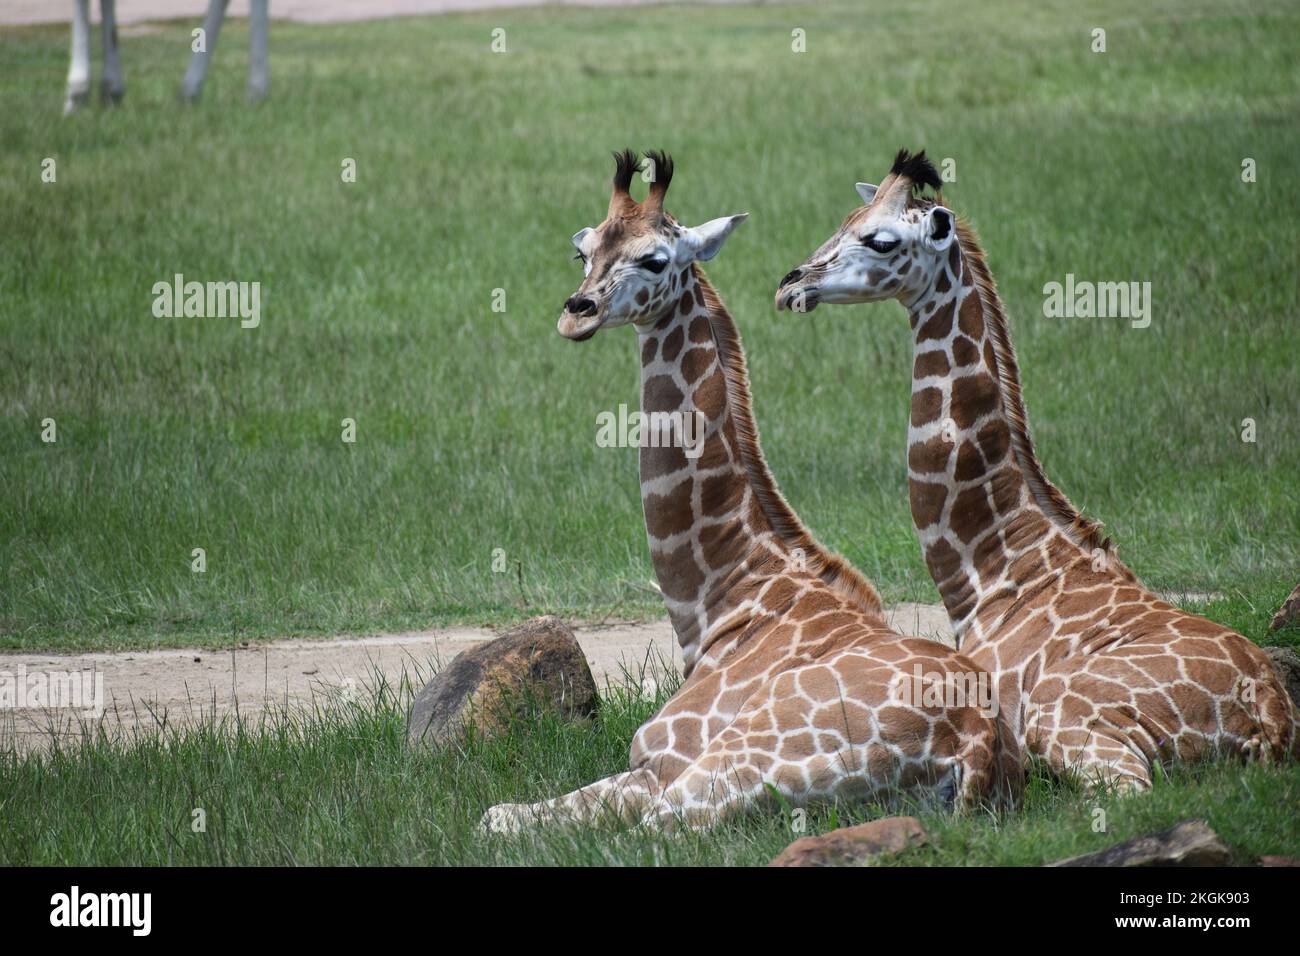 Two Giraffes chilling at Australia zoo, Queensland Stock Photo